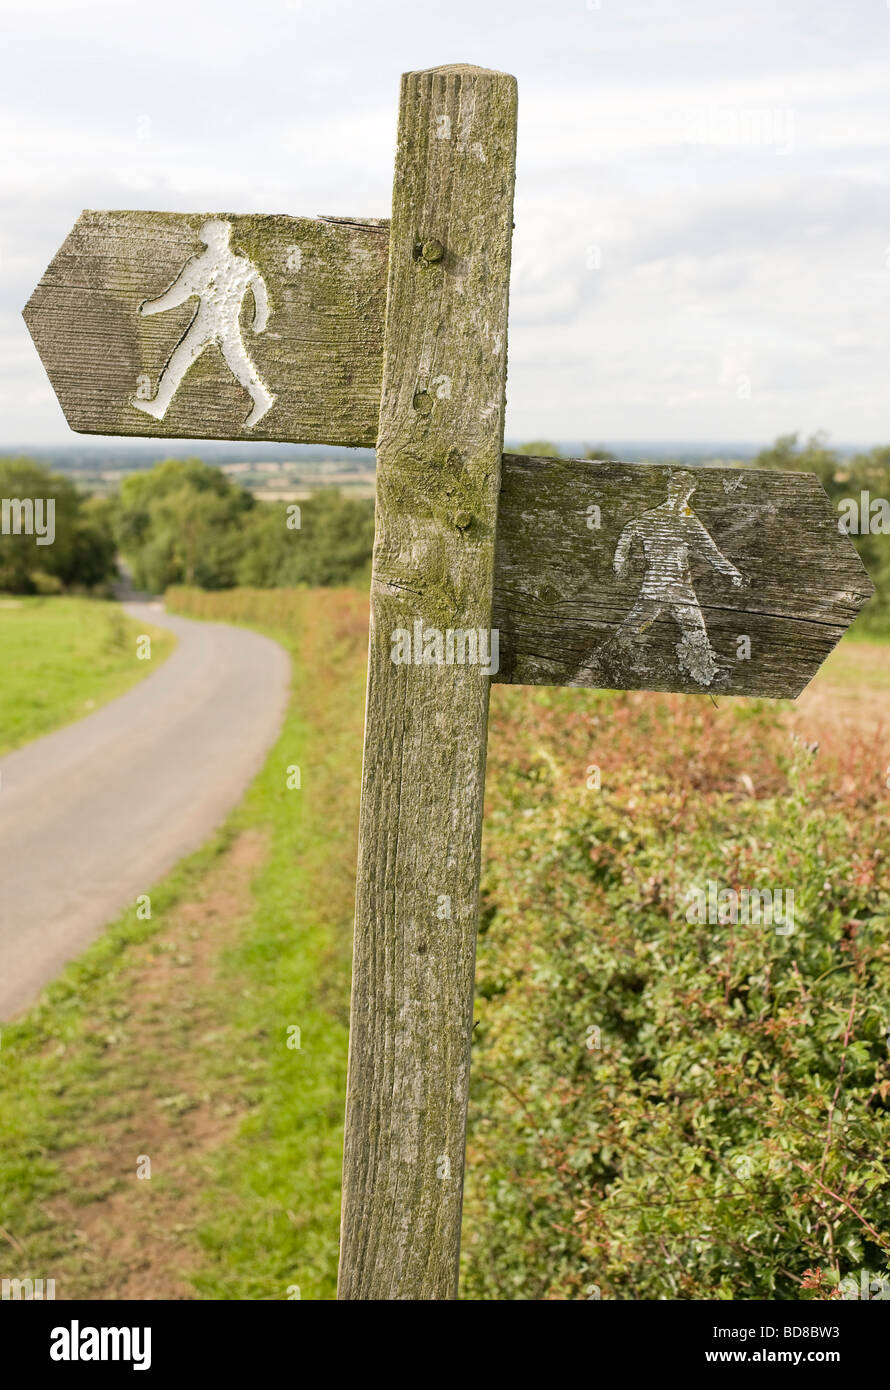 A signpost for walkers on the Cotswold Way footpath in Gloucestershire England UK Stock Photo